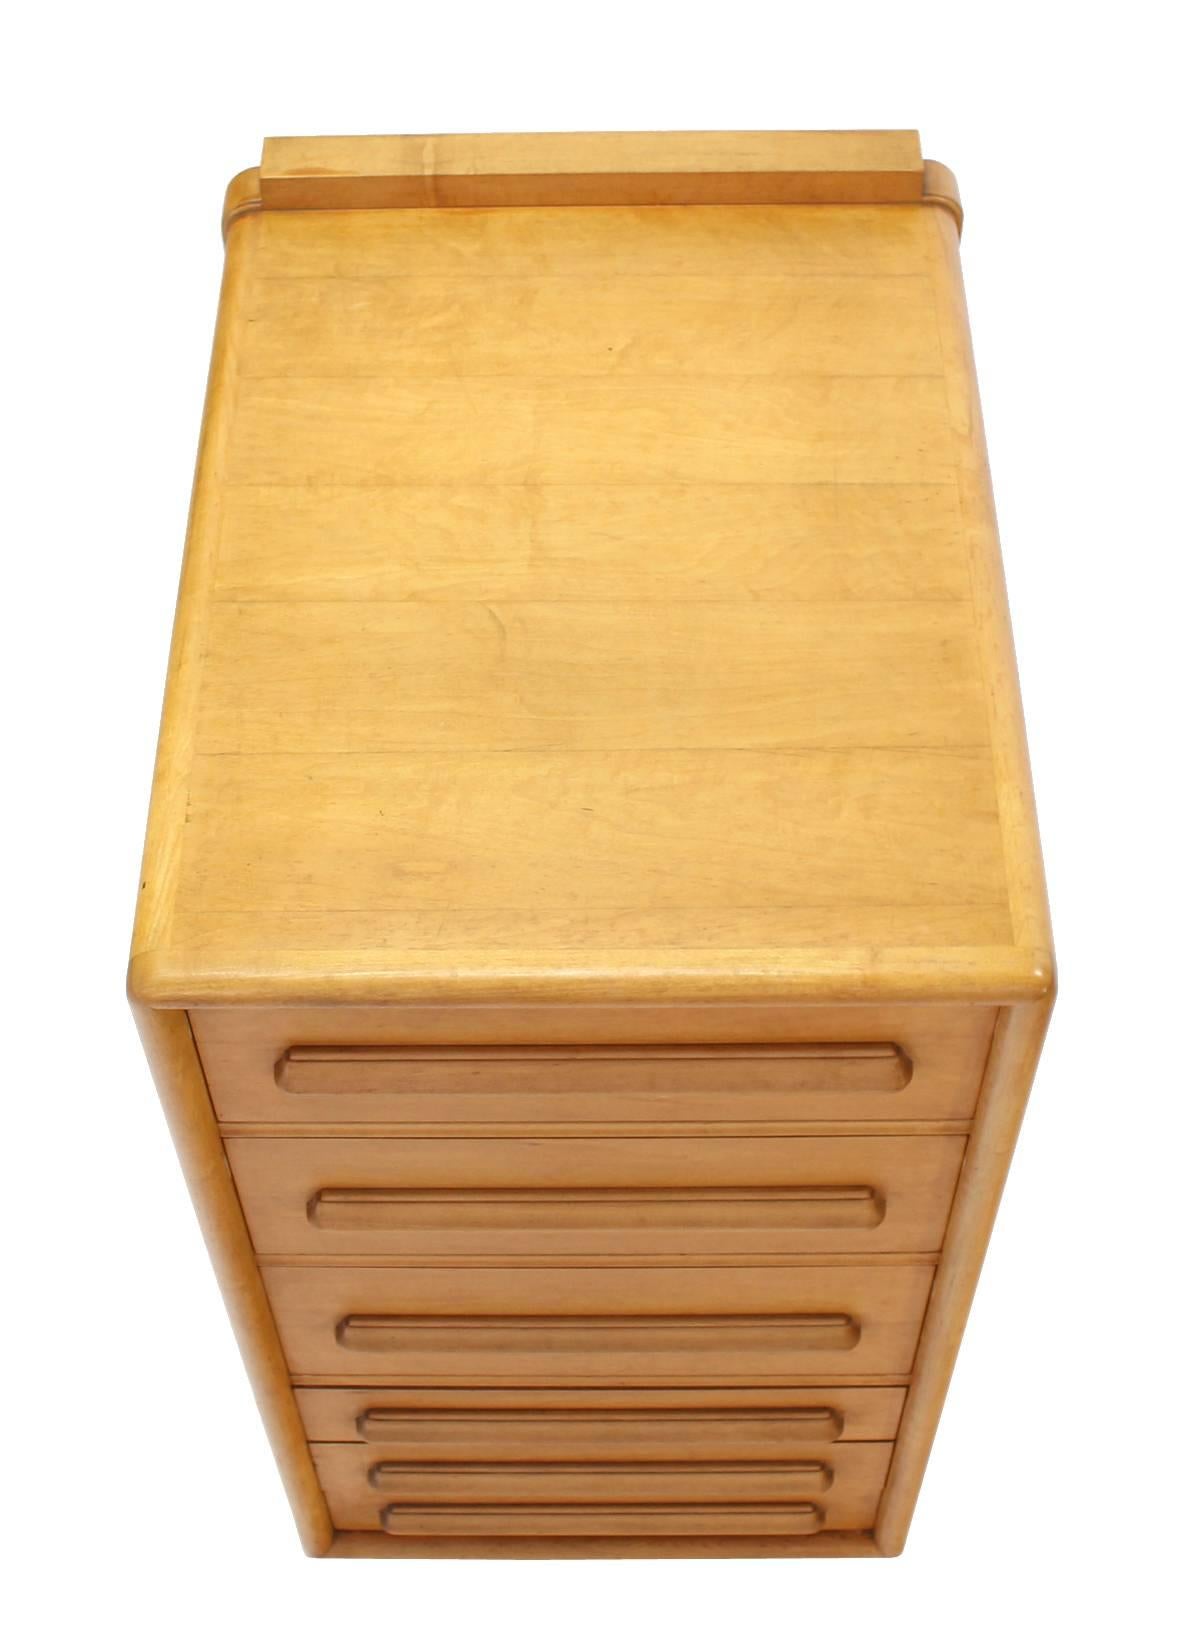 Deep Drawers Heavily Custom Built File Cabinet In Excellent Condition For Sale In Rockaway, NJ